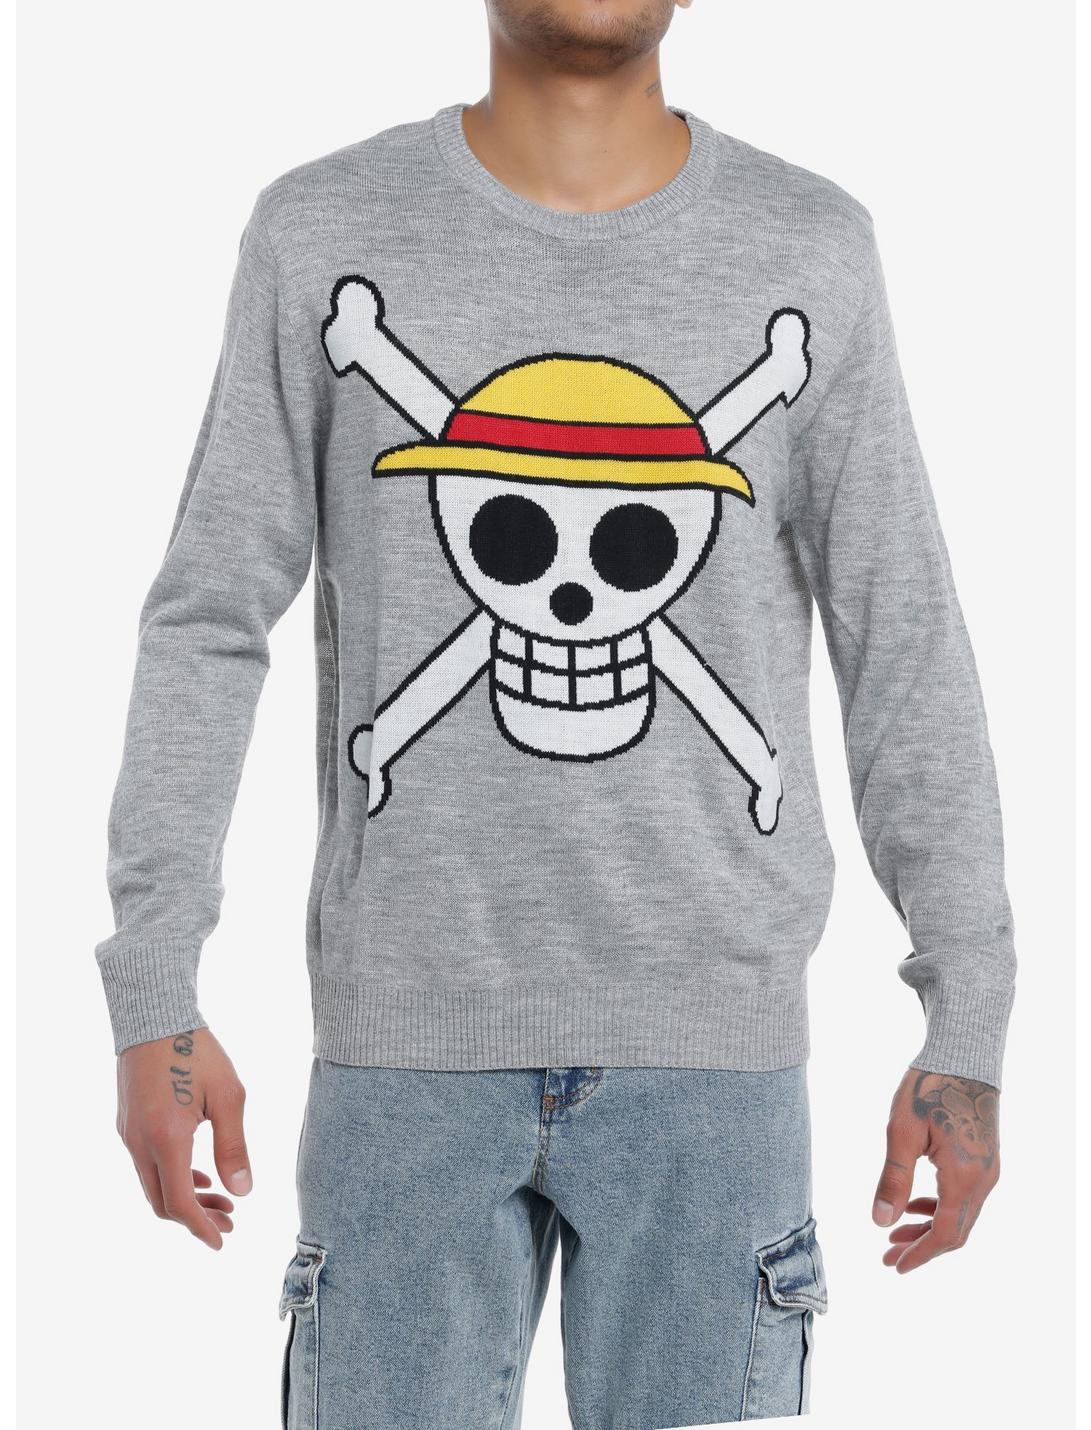 One Piece Straw Hats Jolly Roger Intarsia Knit Sweater, GREY, hi-res